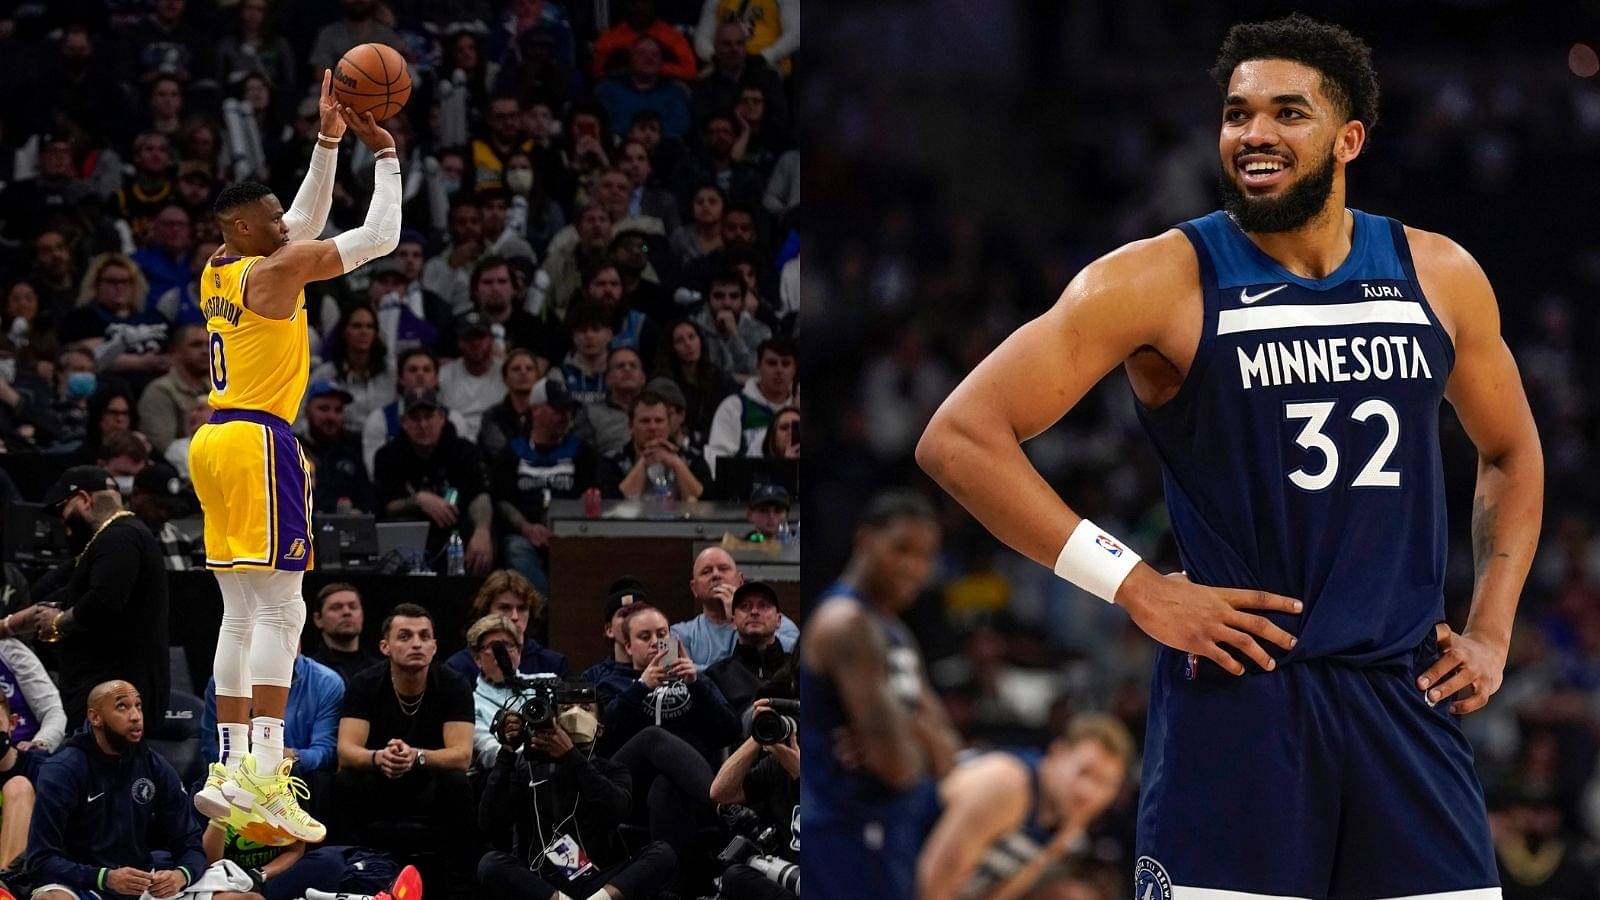 "Karl-Anthony Towns went in a full-on SNL routine at Russell Westbrook's expense": ESPN analyst calls on KAT's and Pat Bev's disrespect of Brodie as the most any big-name player has endured in one game